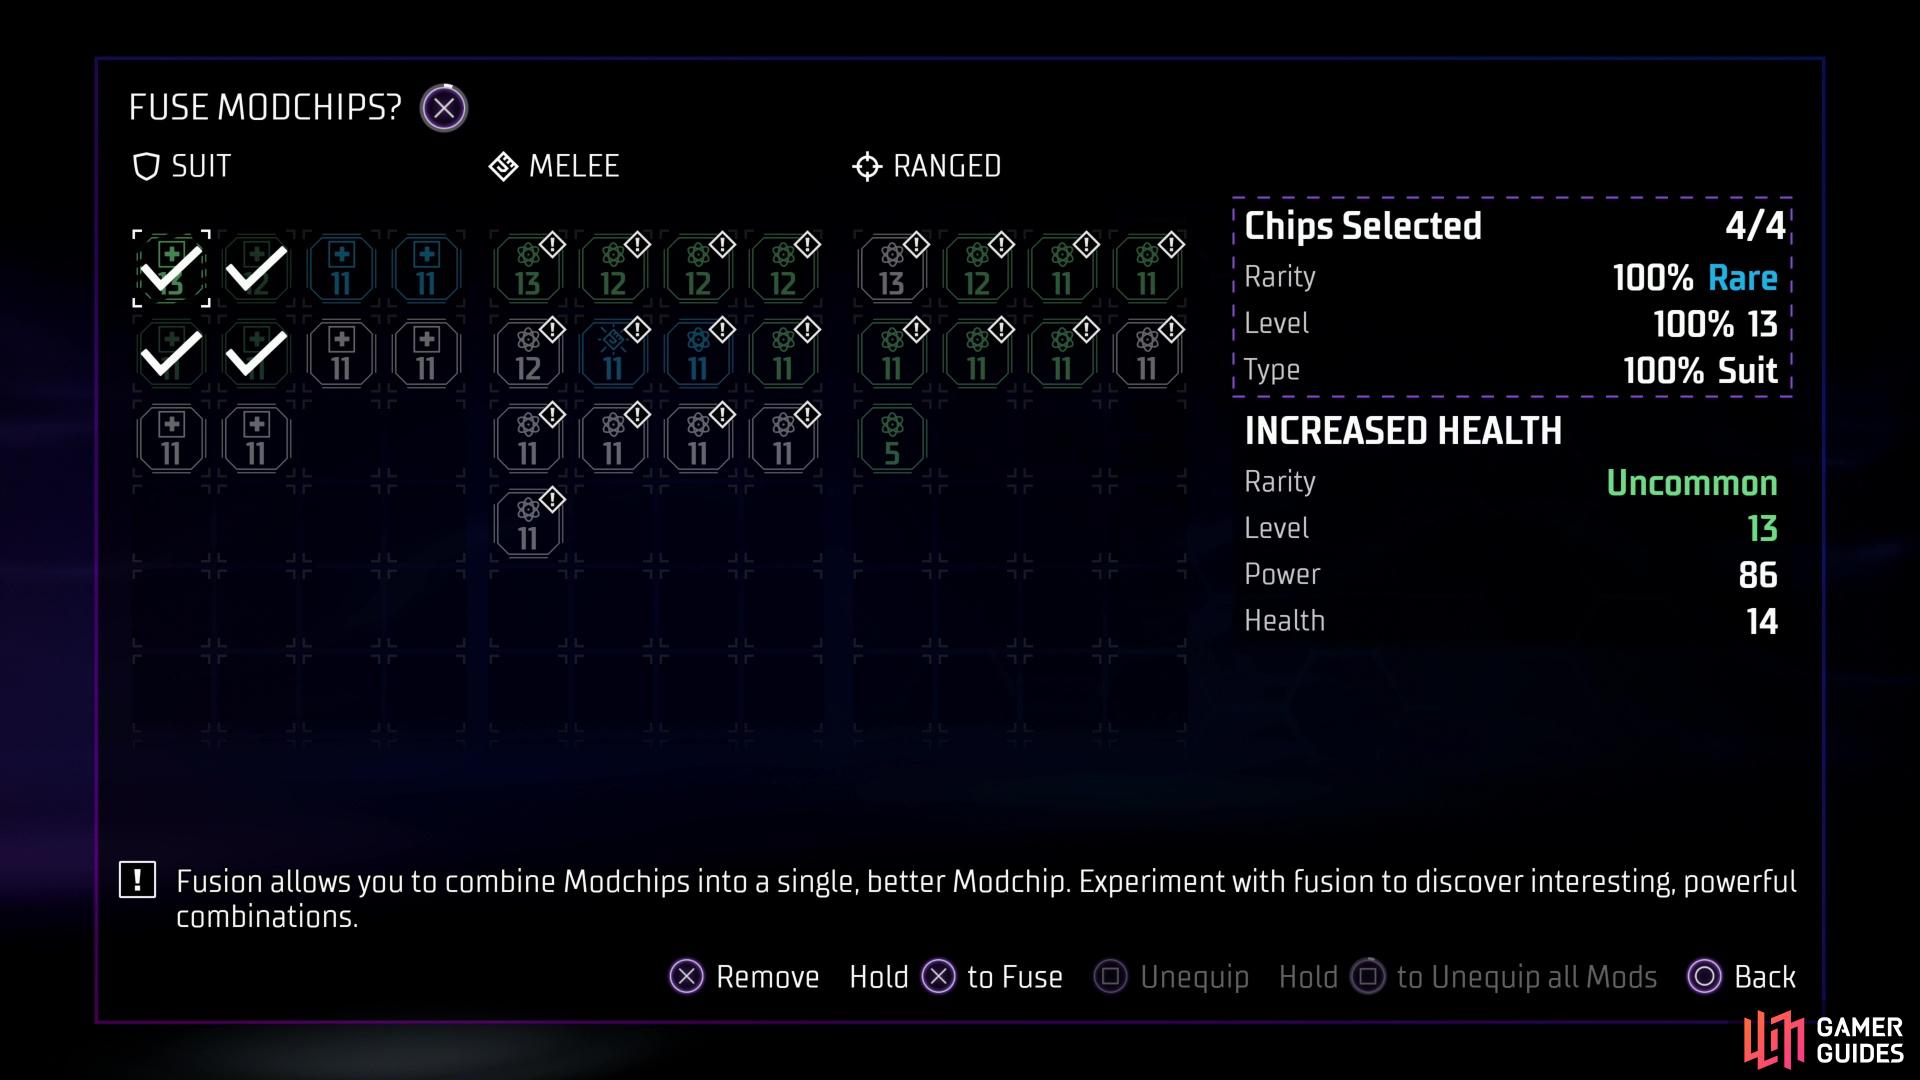 Select any four modchips to fuse them into a new modchip. The rarity, level and type of the fused modchips affects the resulting modchip.